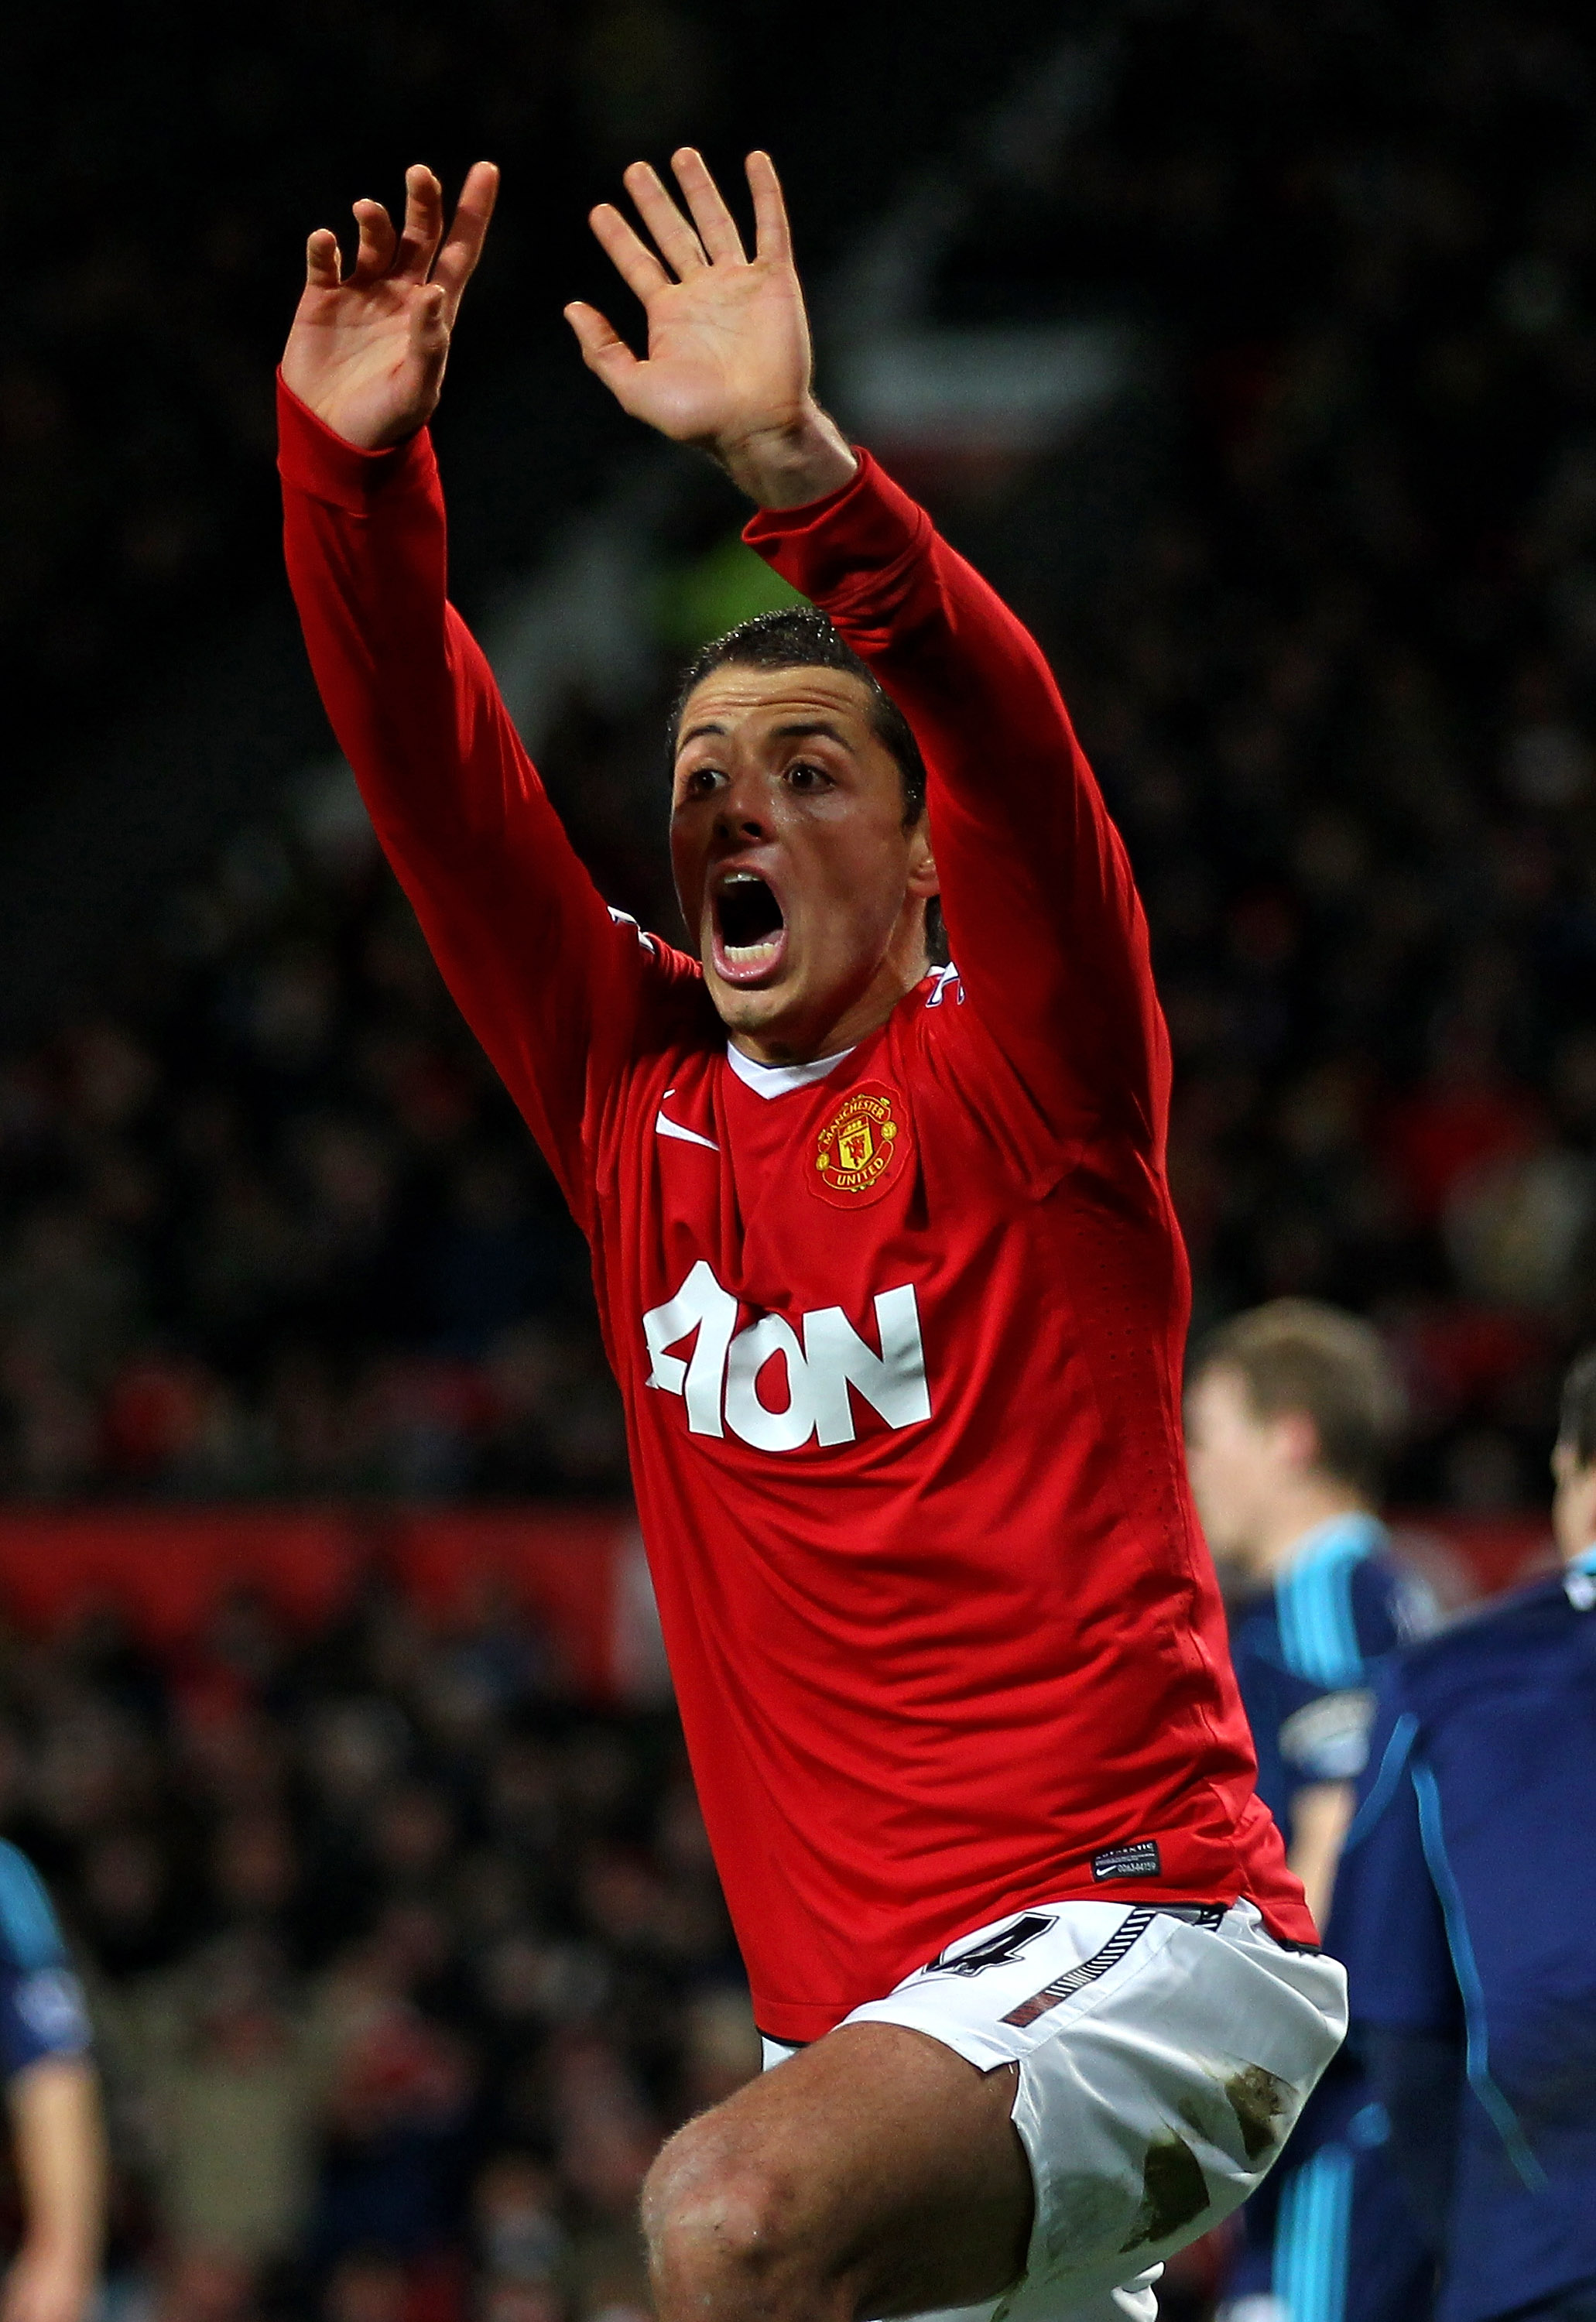 MANCHESTER, ENGLAND - JANUARY 04:  Javier Hernandez of Manchester United reacts during the Barclays Premier League match between Manchester United and Stoke City at Old Trafford on January 4, 2011 in Manchester, England.  (Photo by Clive Brunskill/Getty I